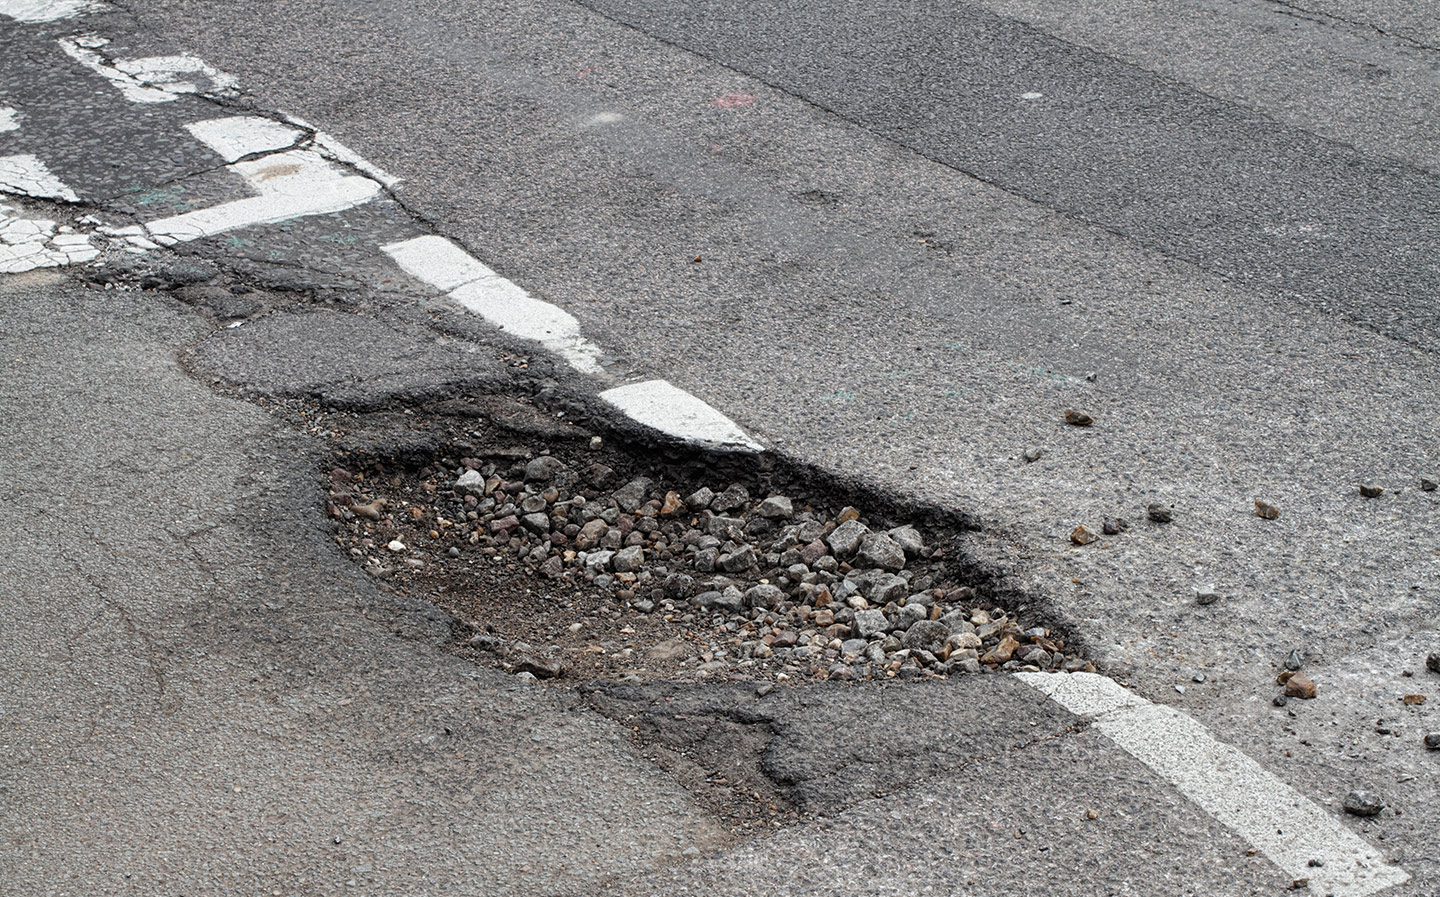 Potholes cost British drivers £1.7bn a year in repairs